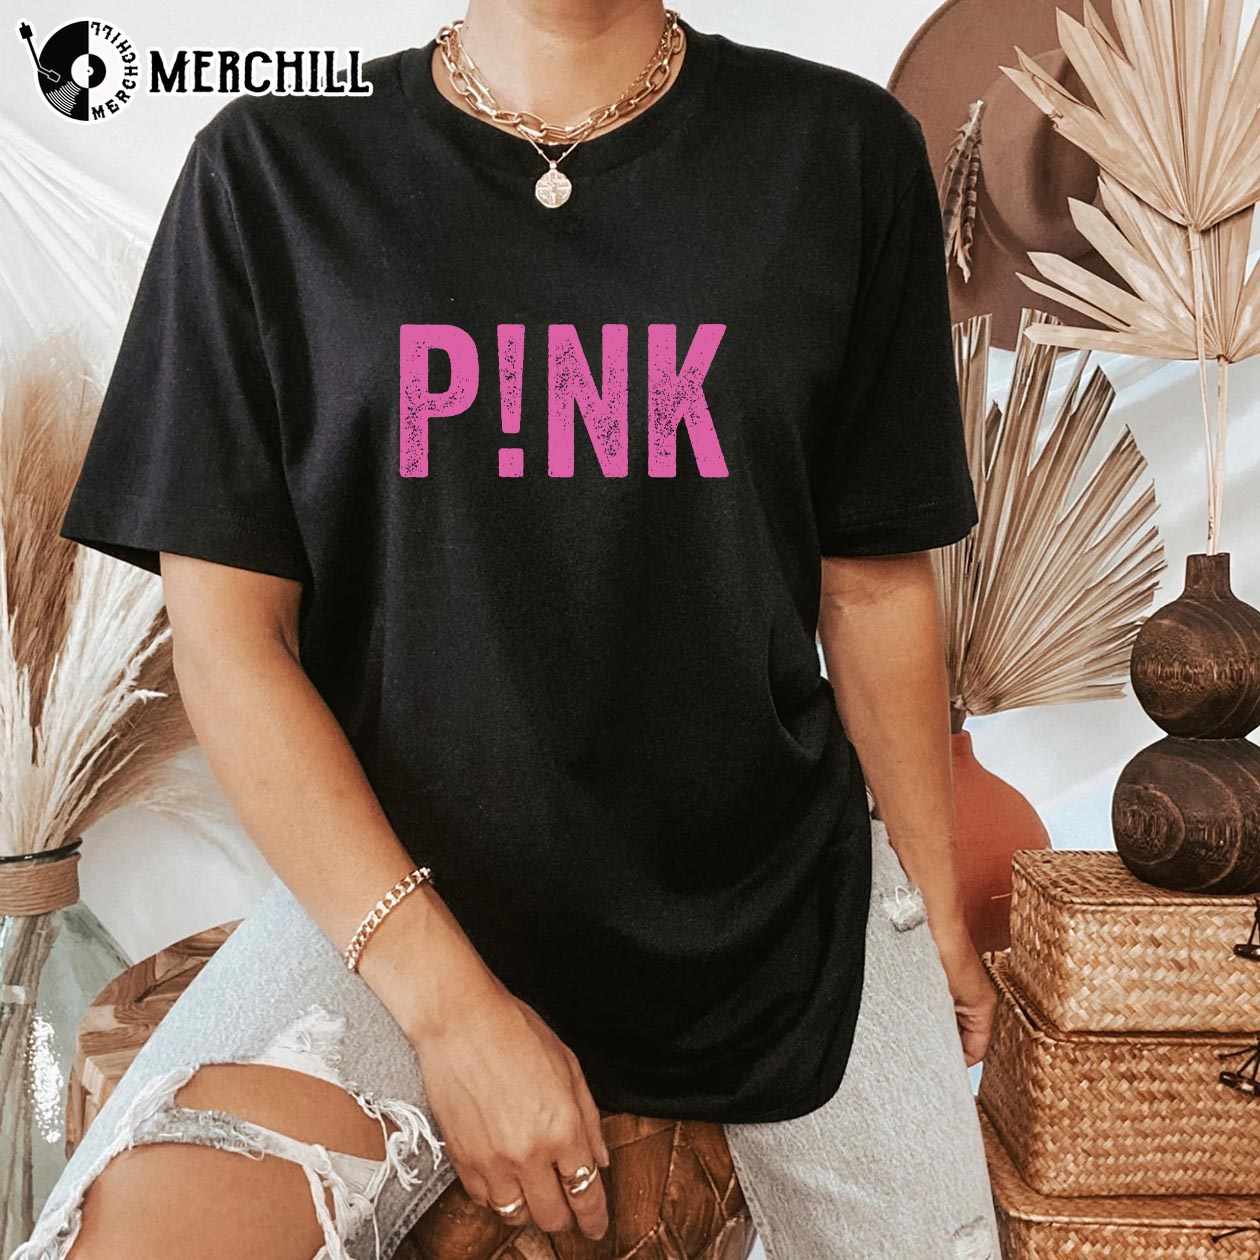 P!nk Shirt Pink Summer Carnival 2023 Tour - Happy Place for Music